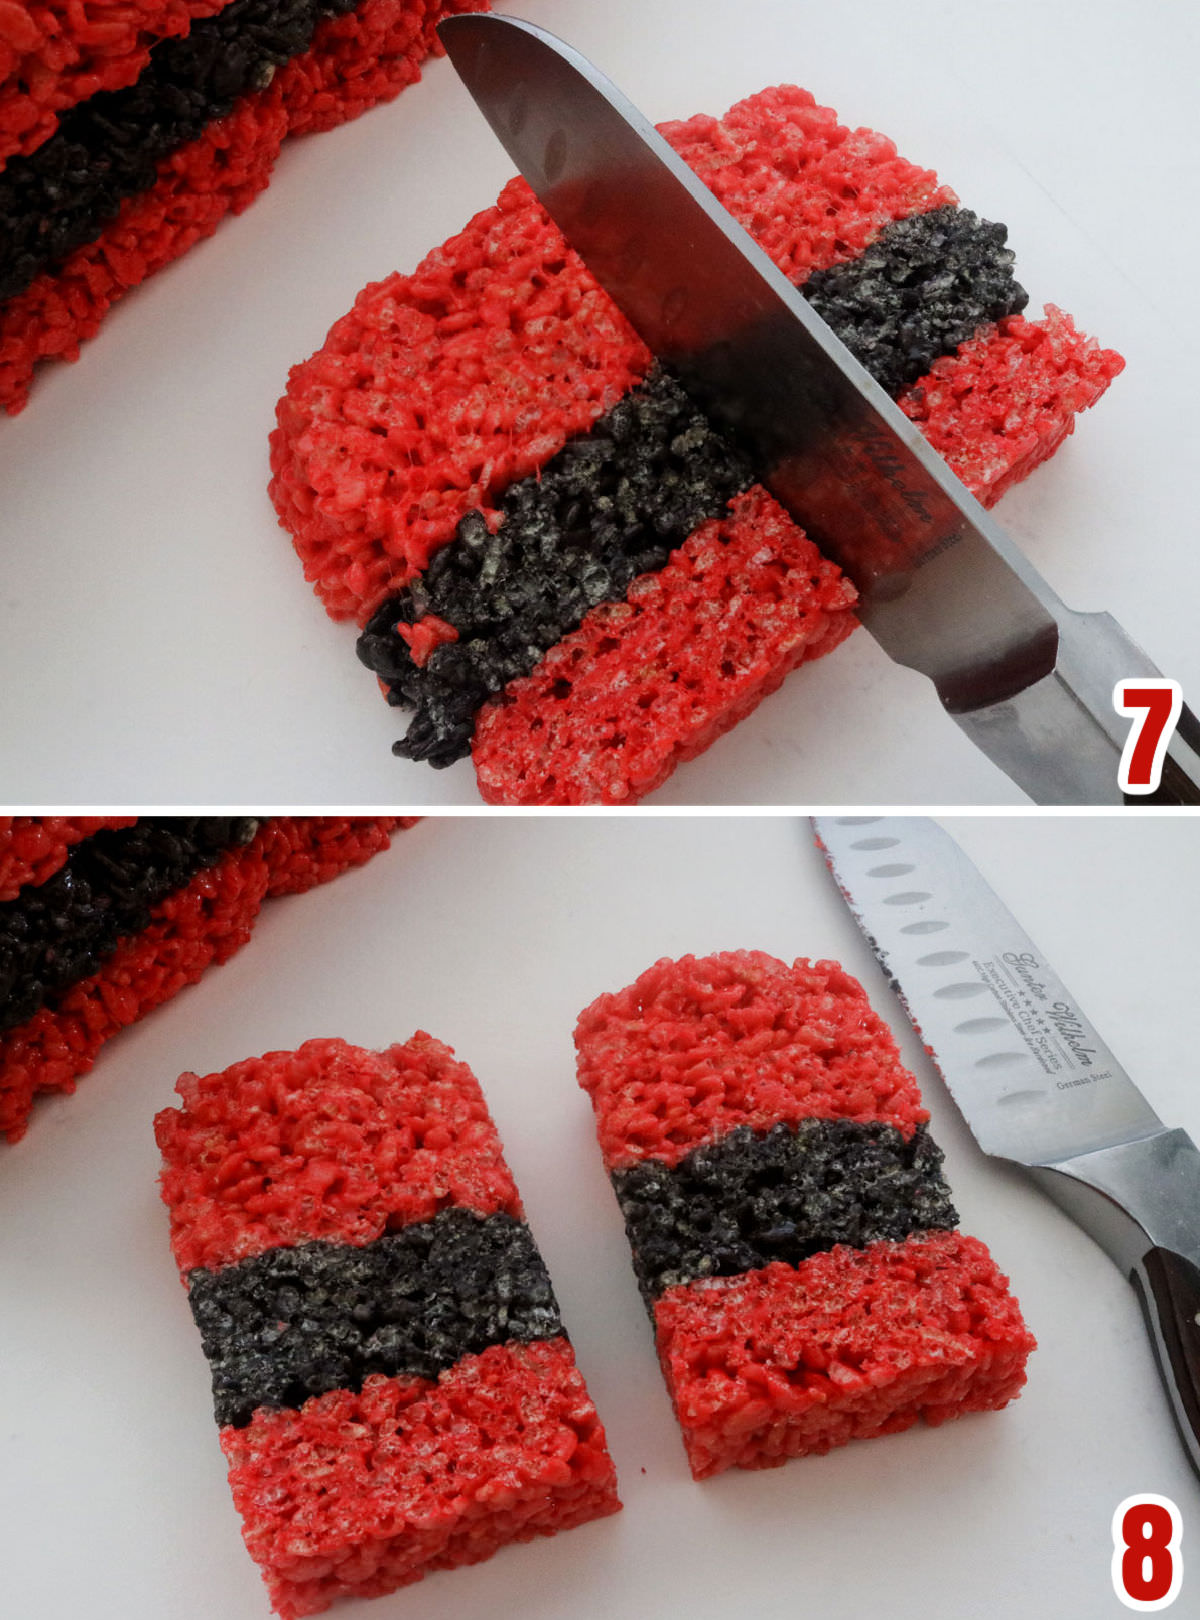 Collage image showing the steps for making the individual Santa Claus Rice Krispie Treats from the loaf.